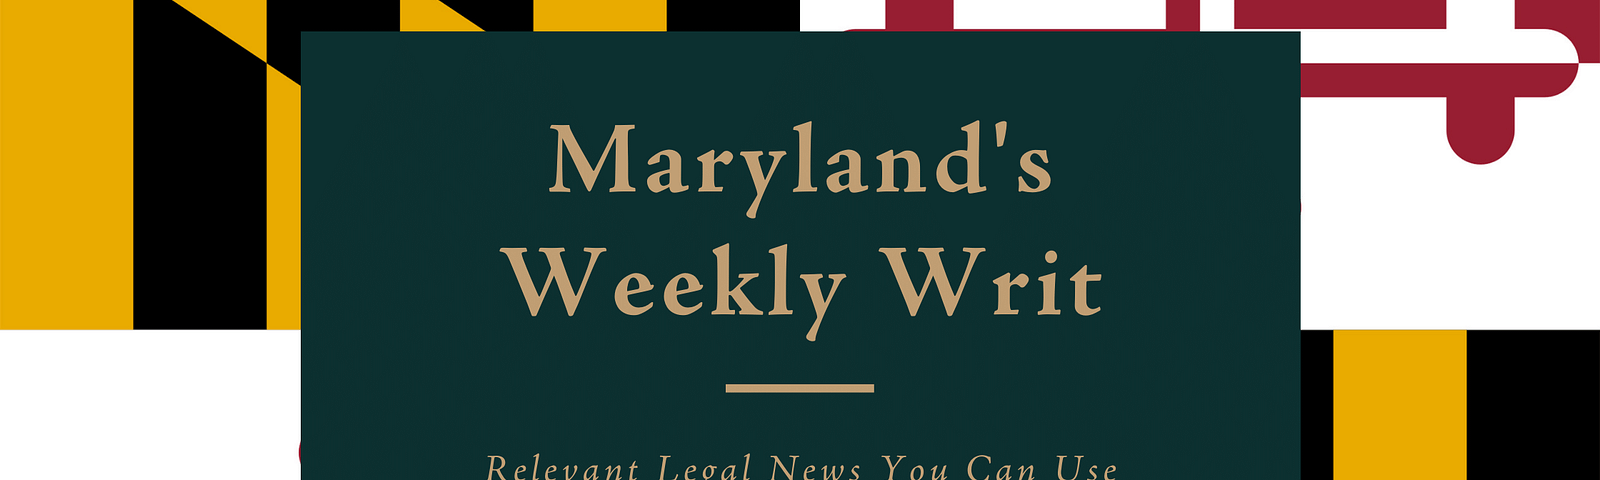 The Weekly Writ: Maryland Legal News You Can Use for July 19, 2021